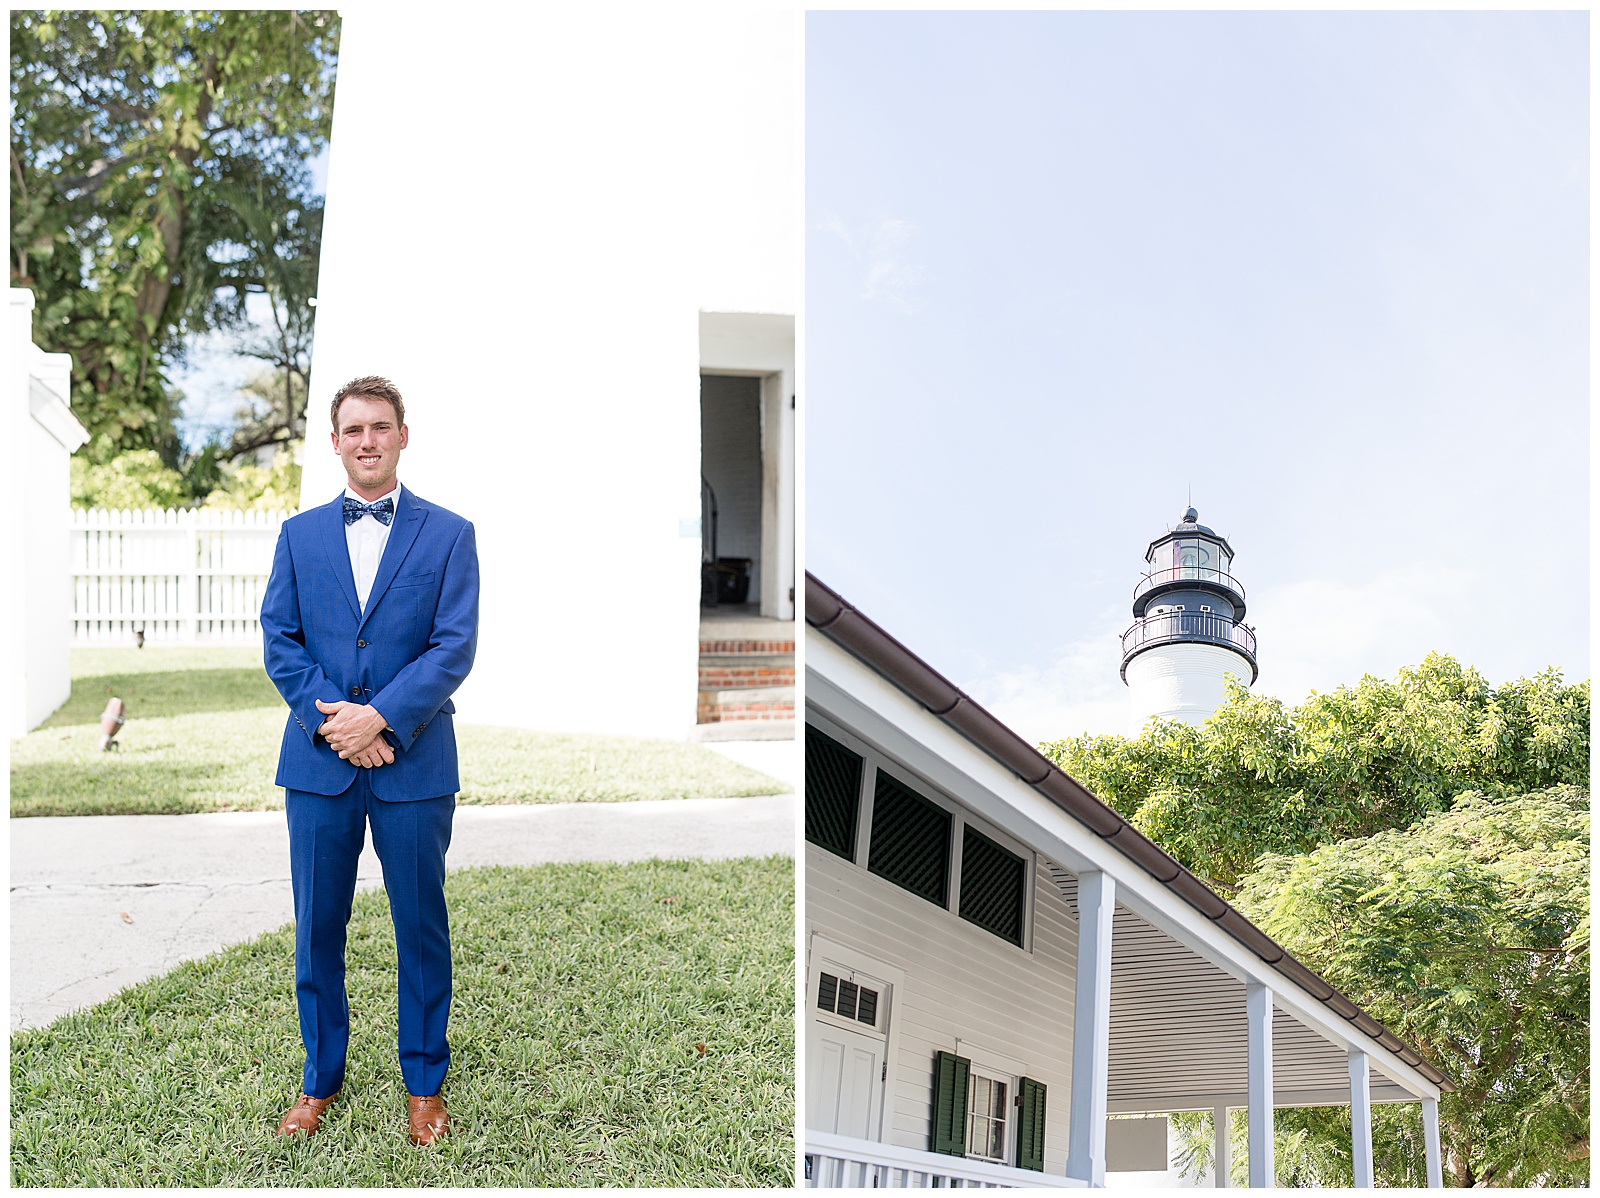 groom smiling in camera in bright blue suit by white lighthouse on sunny day